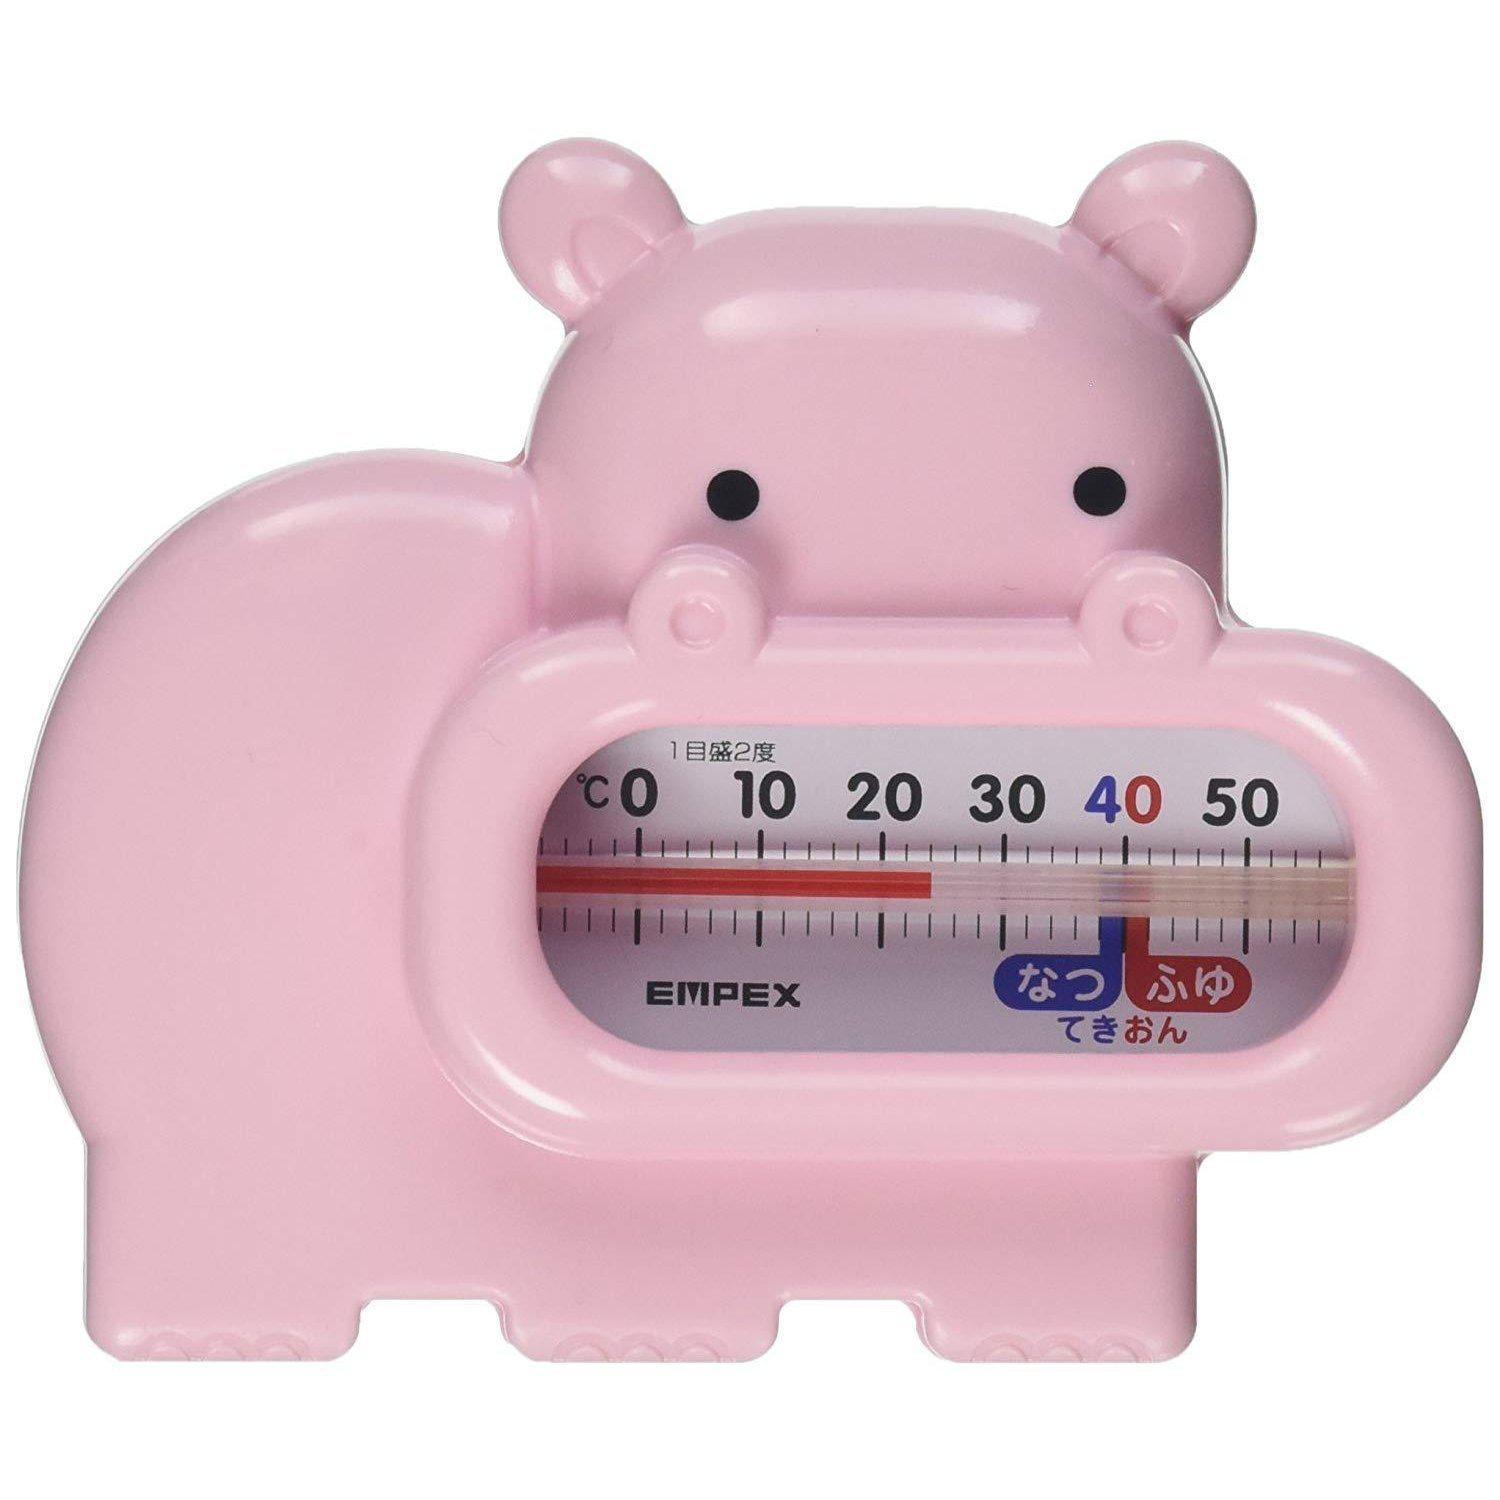 Empex Floating Hippopotamus Toy and Baby Bath Thermometer TG-5133